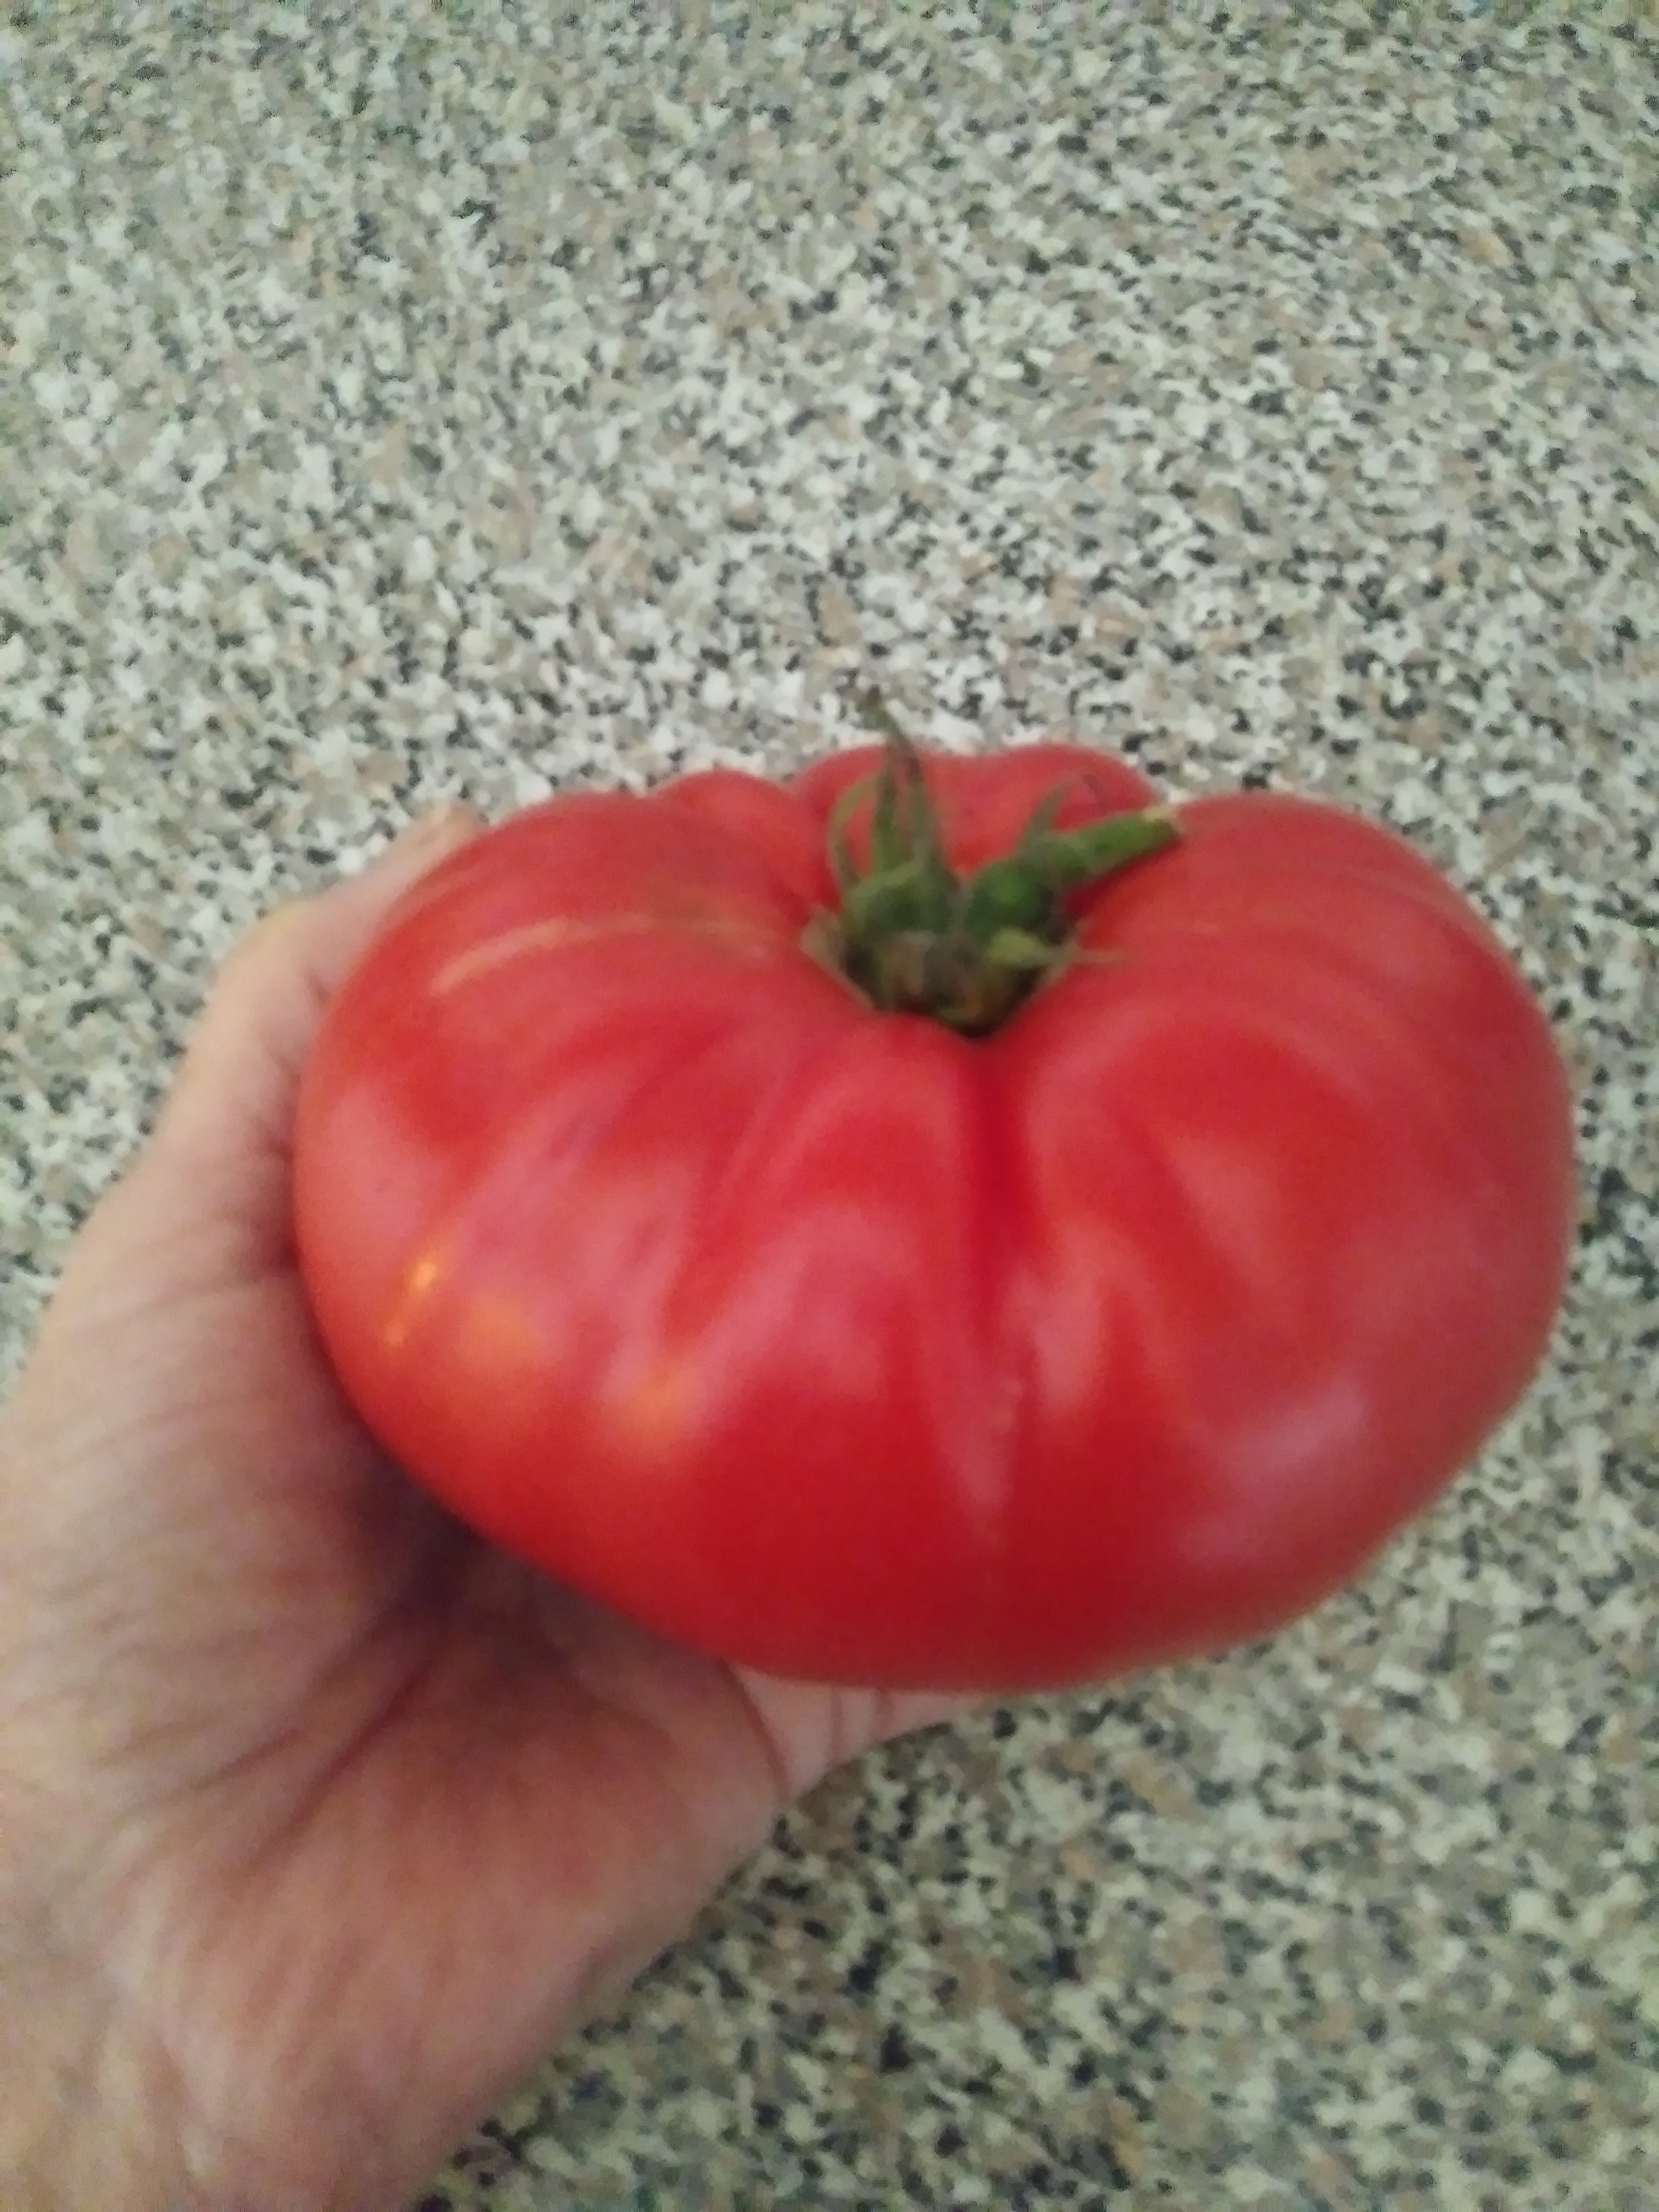 Beefsteak Tomatoes – All You Need to Know